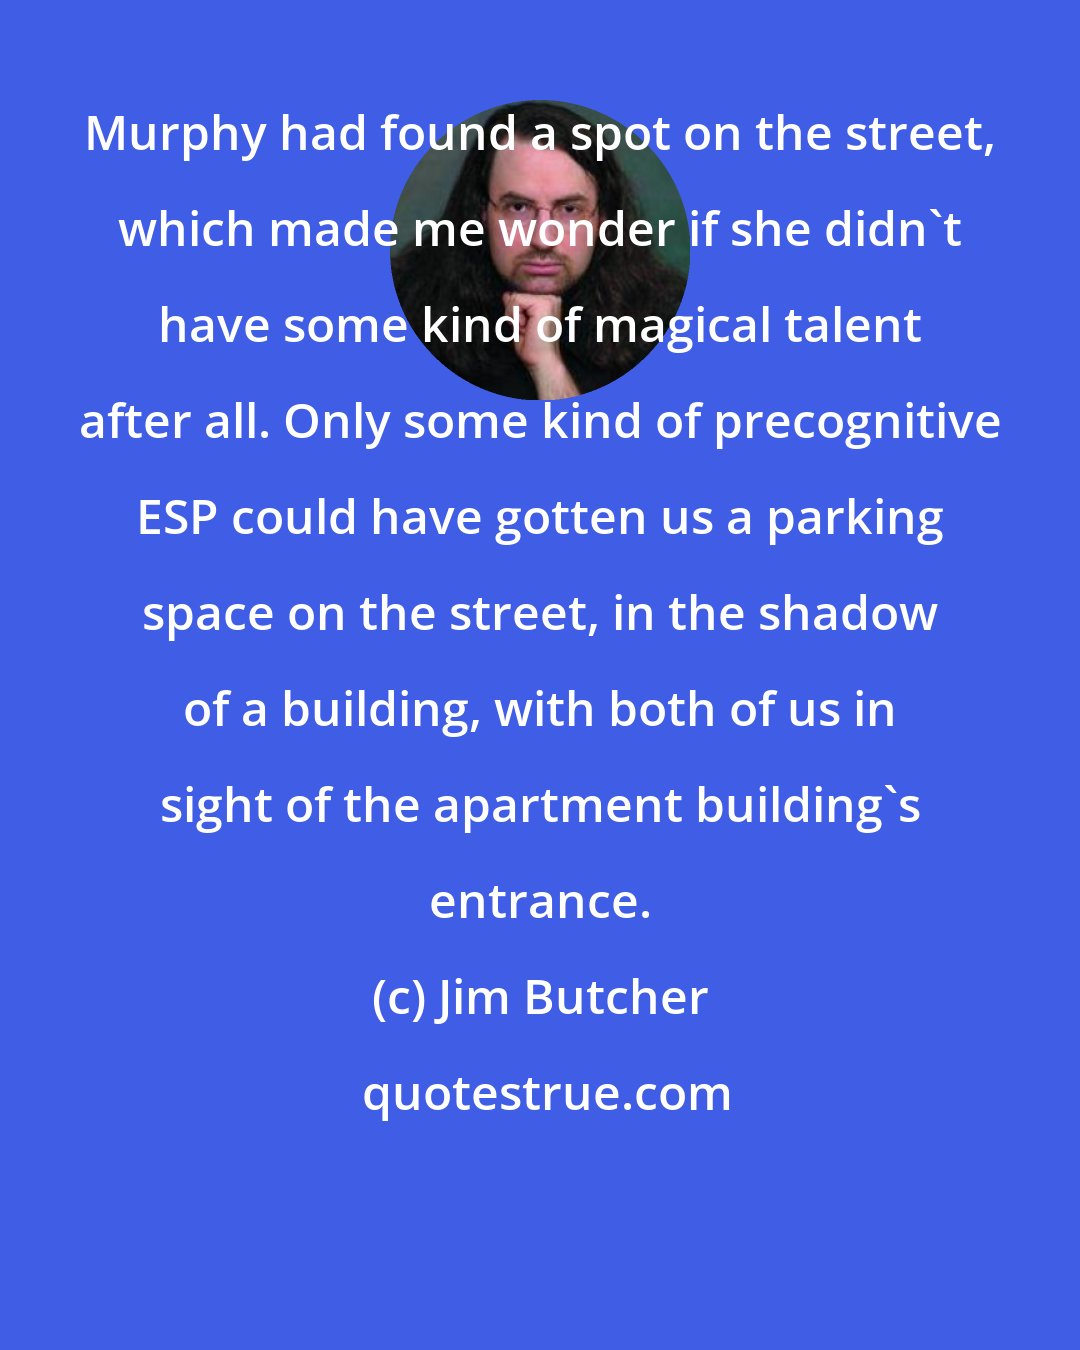 Jim Butcher: Murphy had found a spot on the street, which made me wonder if she didn't have some kind of magical talent after all. Only some kind of precognitive ESP could have gotten us a parking space on the street, in the shadow of a building, with both of us in sight of the apartment building's entrance.